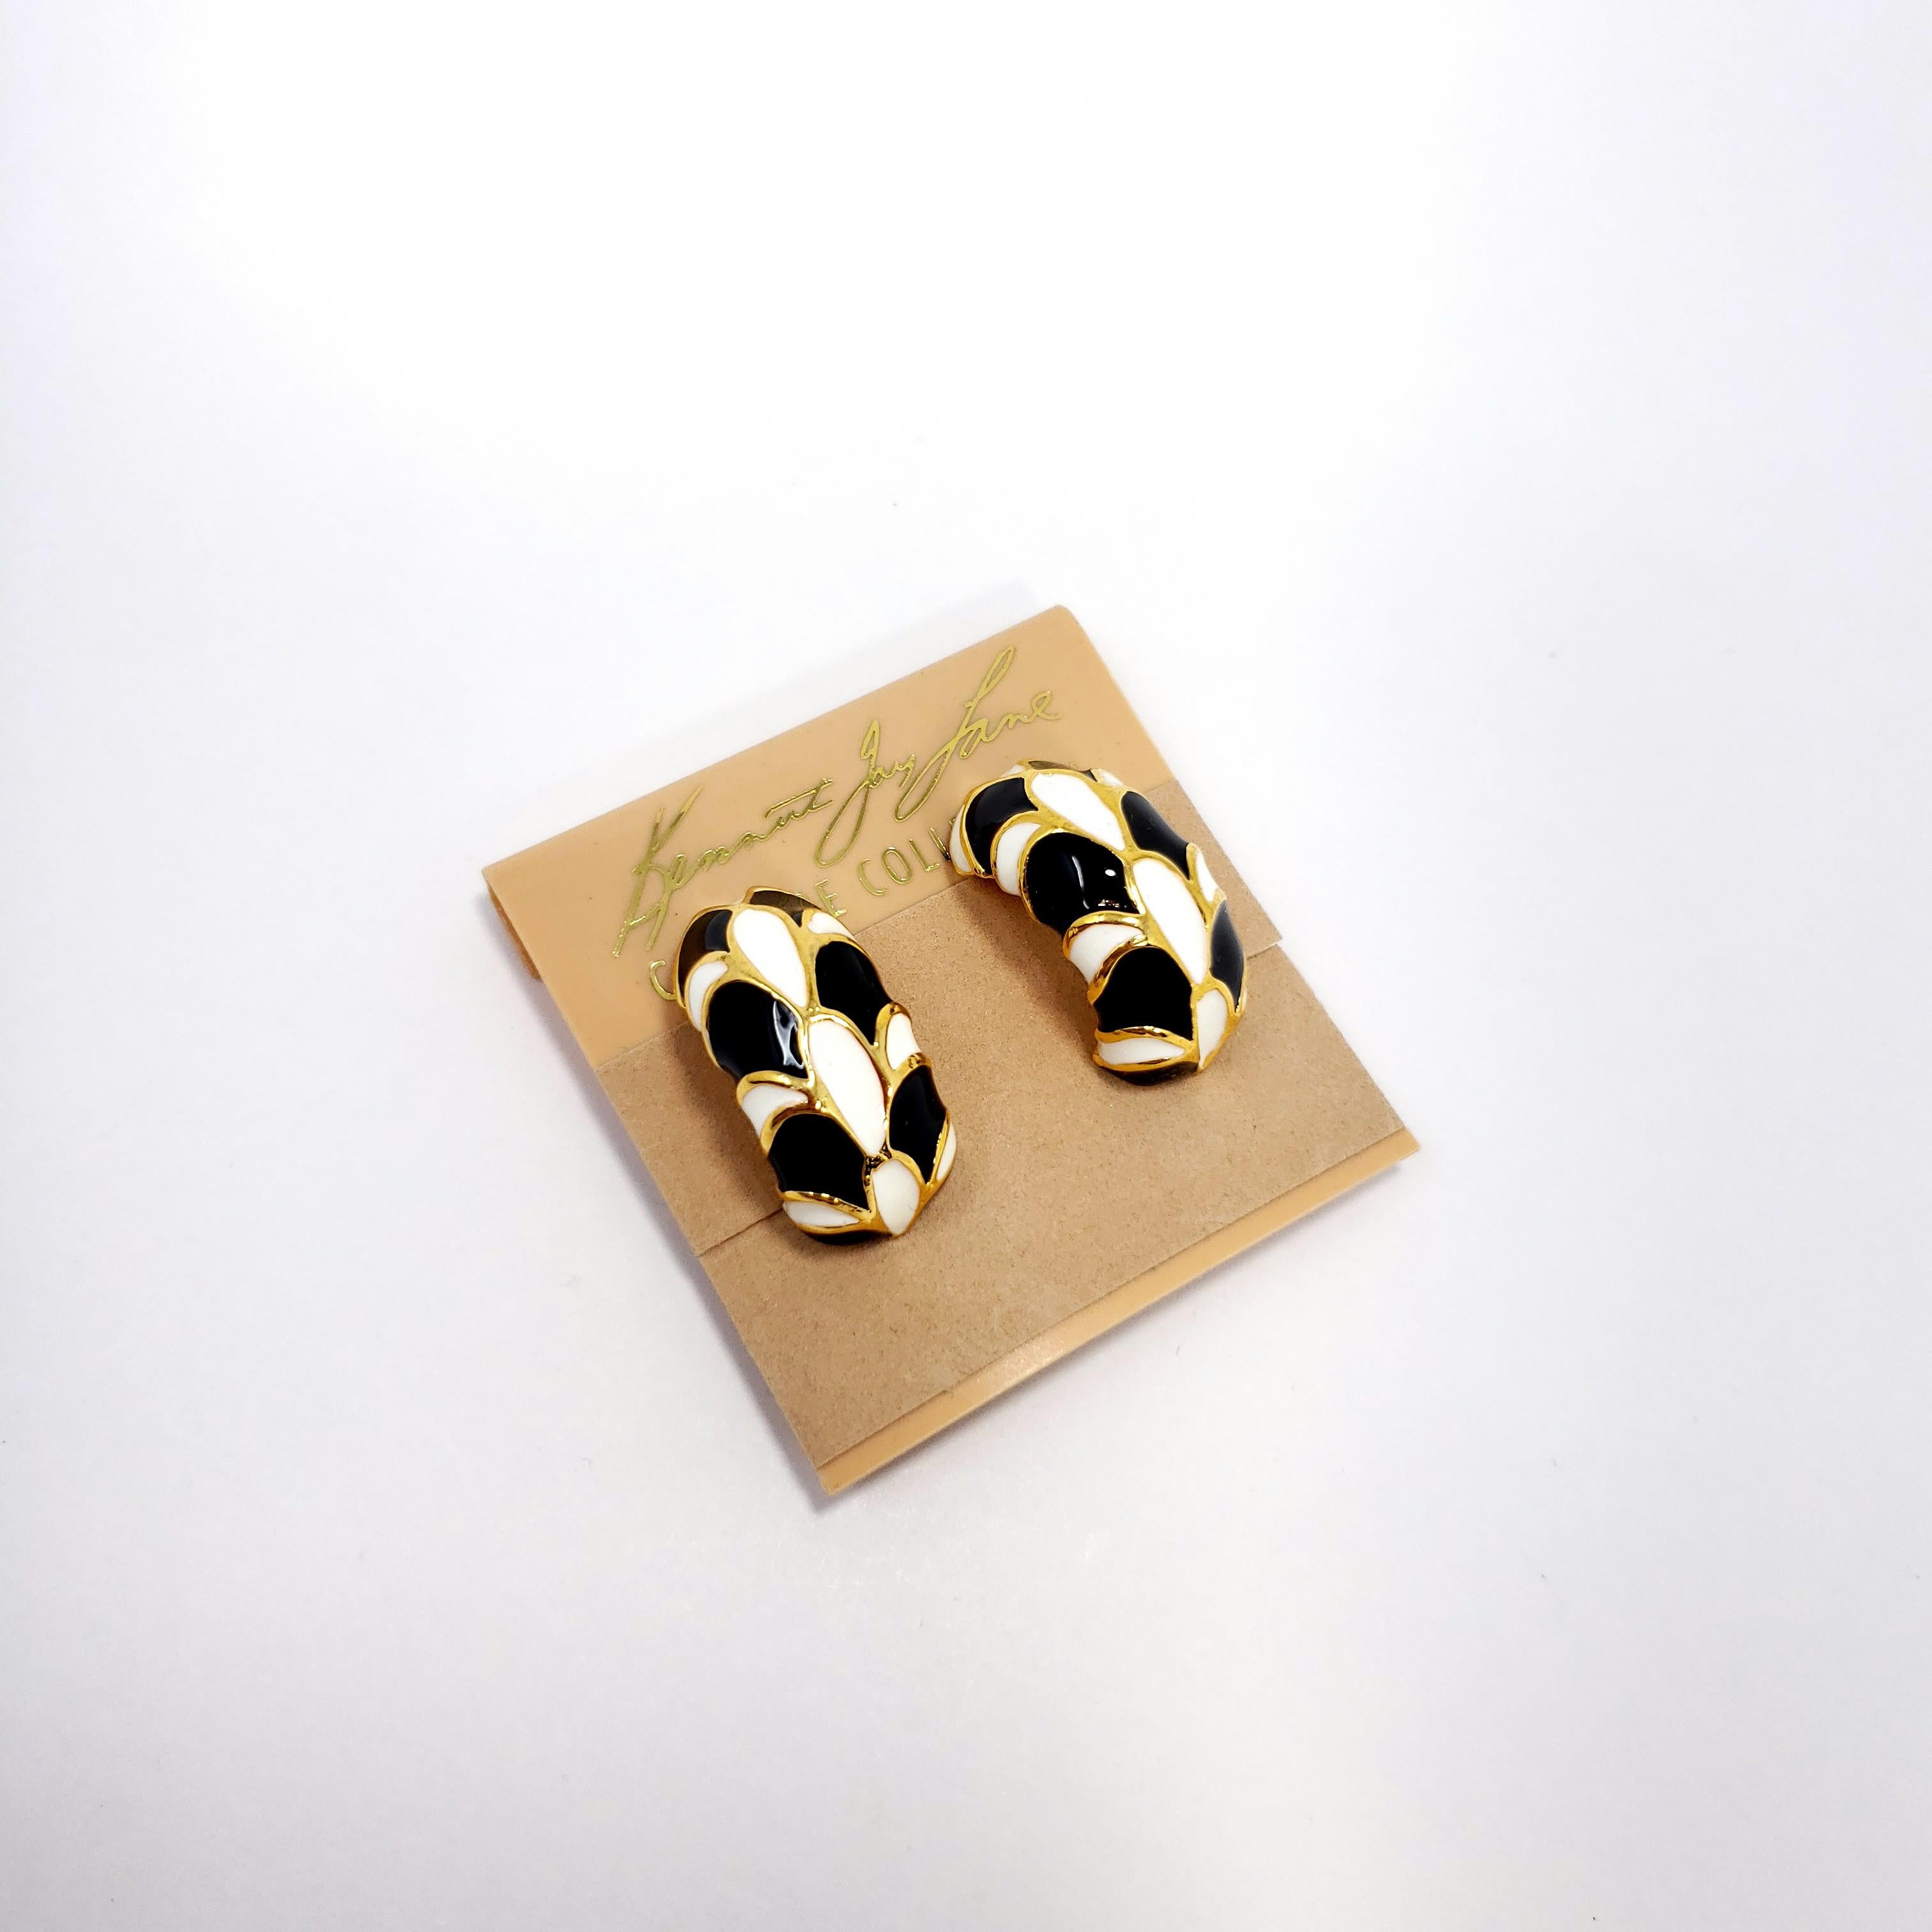 Stylish clip-on earrings by Kenneth Jay Lane! Each goldtone earring is painted with white and black enamel in a retro gold-outline pattern.

Hallmarks: KJL